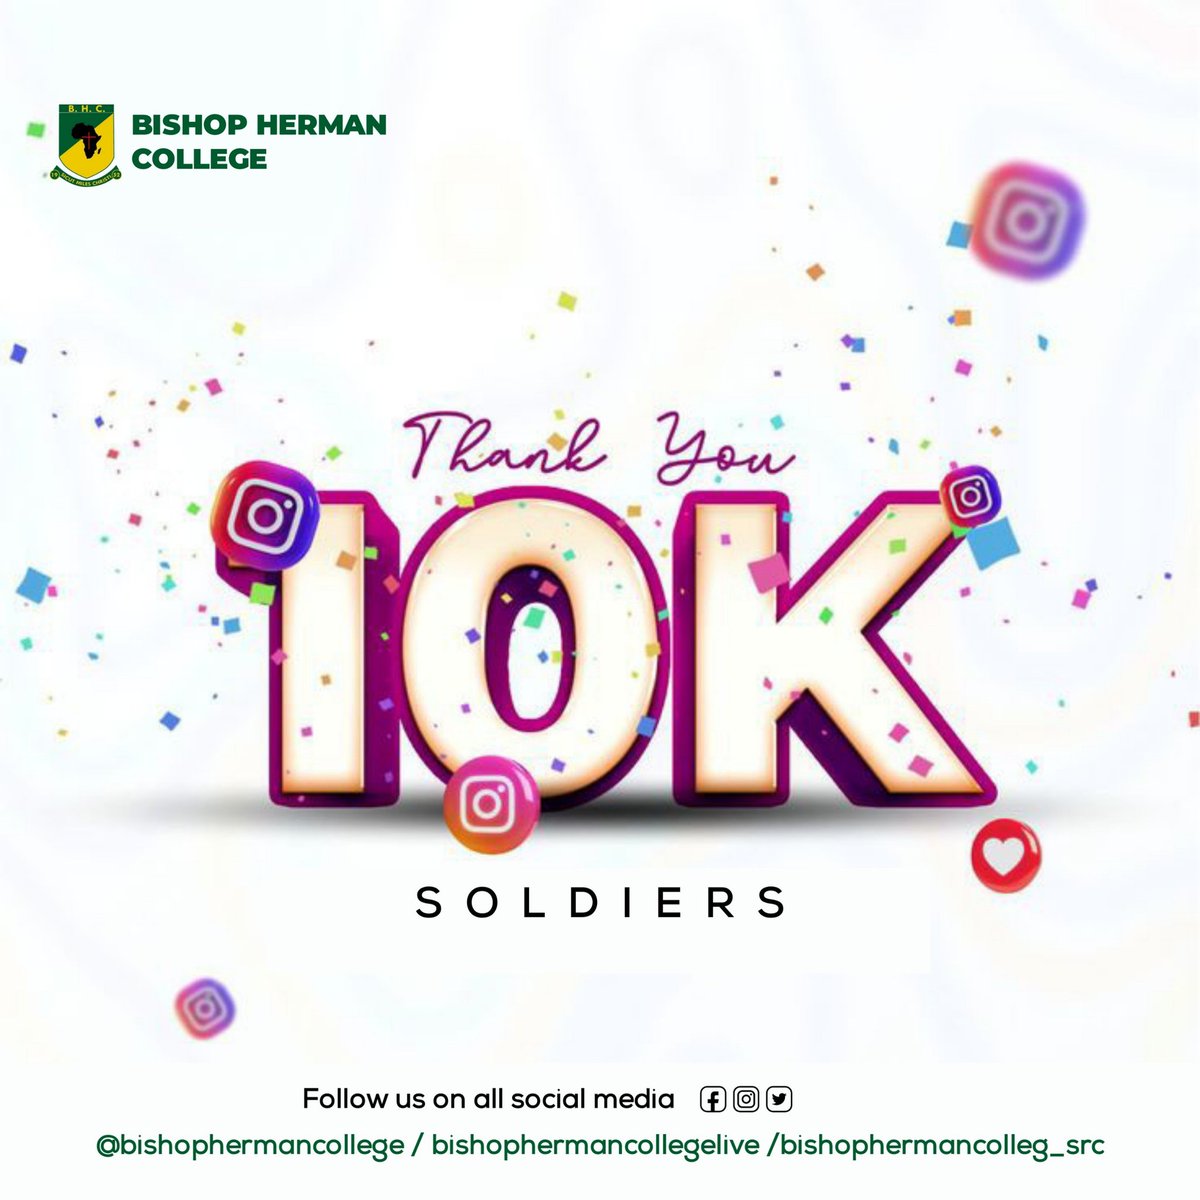 10k Soldiers! 🎉🌟 Thank you for being part of this amazing journey. Let’s keep shining together! 💛💚

NB: Let's hit 1,000 soldiers on X soon.

#ForeverTogether #BHC #Soldiers #Biheco #BHOBU